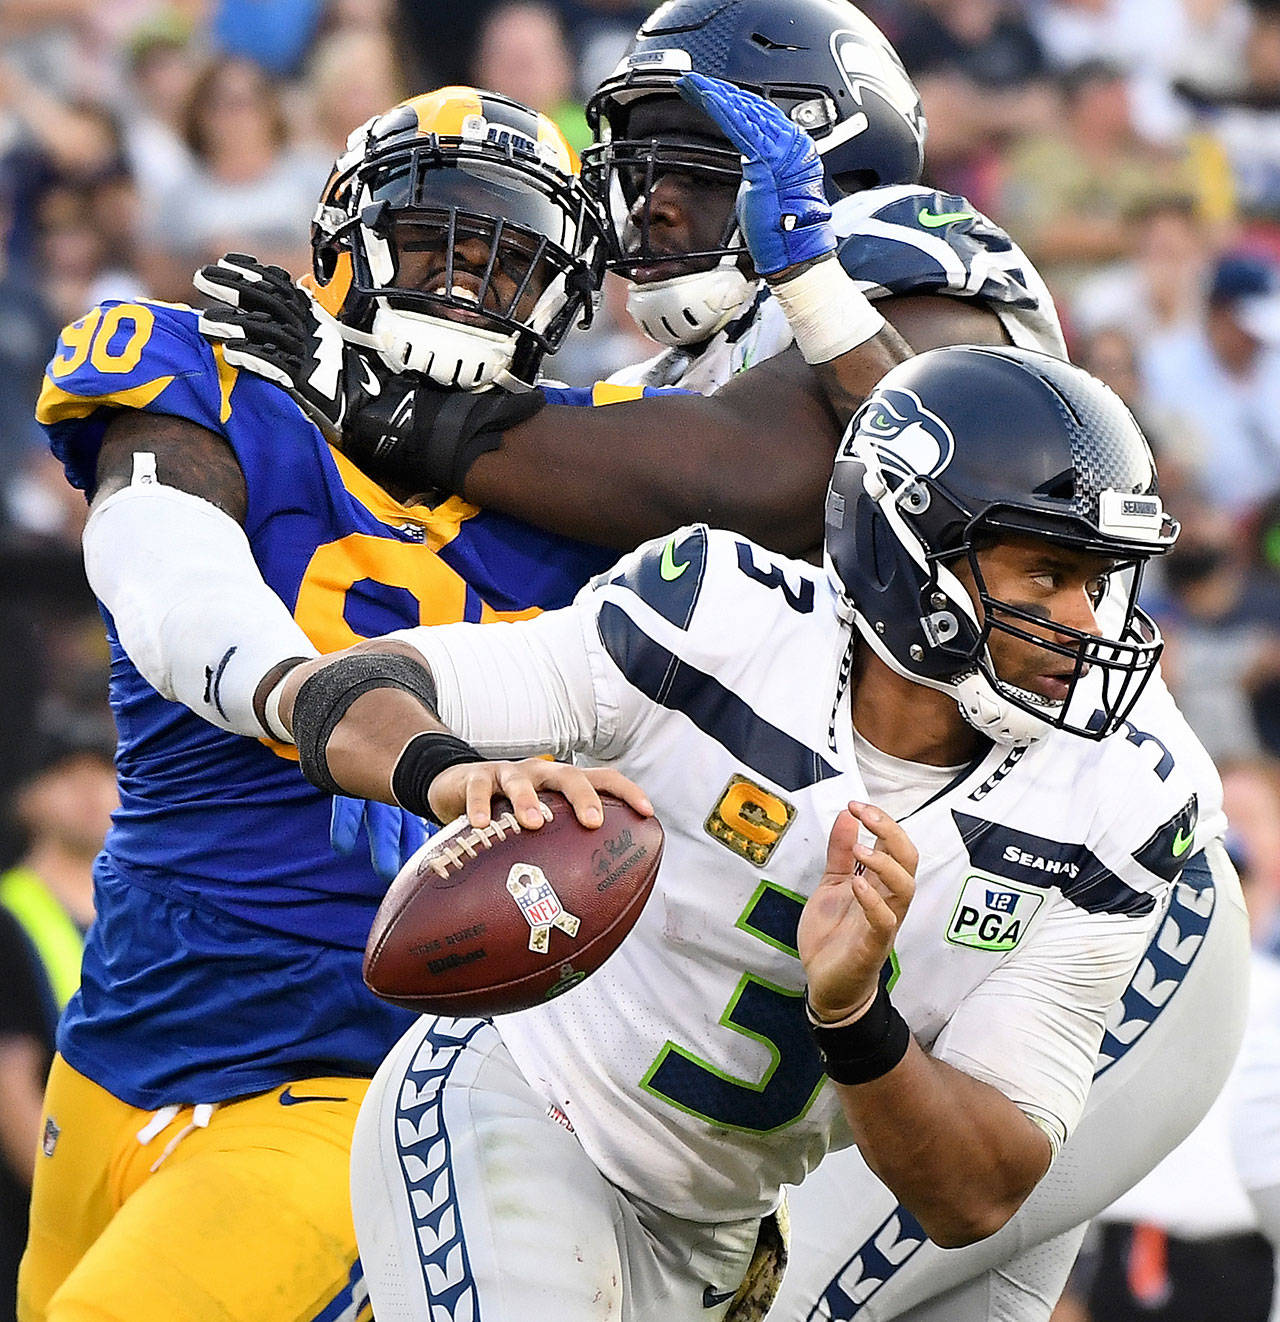 Seattle Seahawks quarterback Russell Wilson scrambles away from Los Angeles Rams defensive lineman Michael Brockers in the fourth quarter on Sunday, Nov. 11, 2018 at the Coliseum in Los Angeles, Calif. (Wally Skalij/Los Angeles Times/TNS)